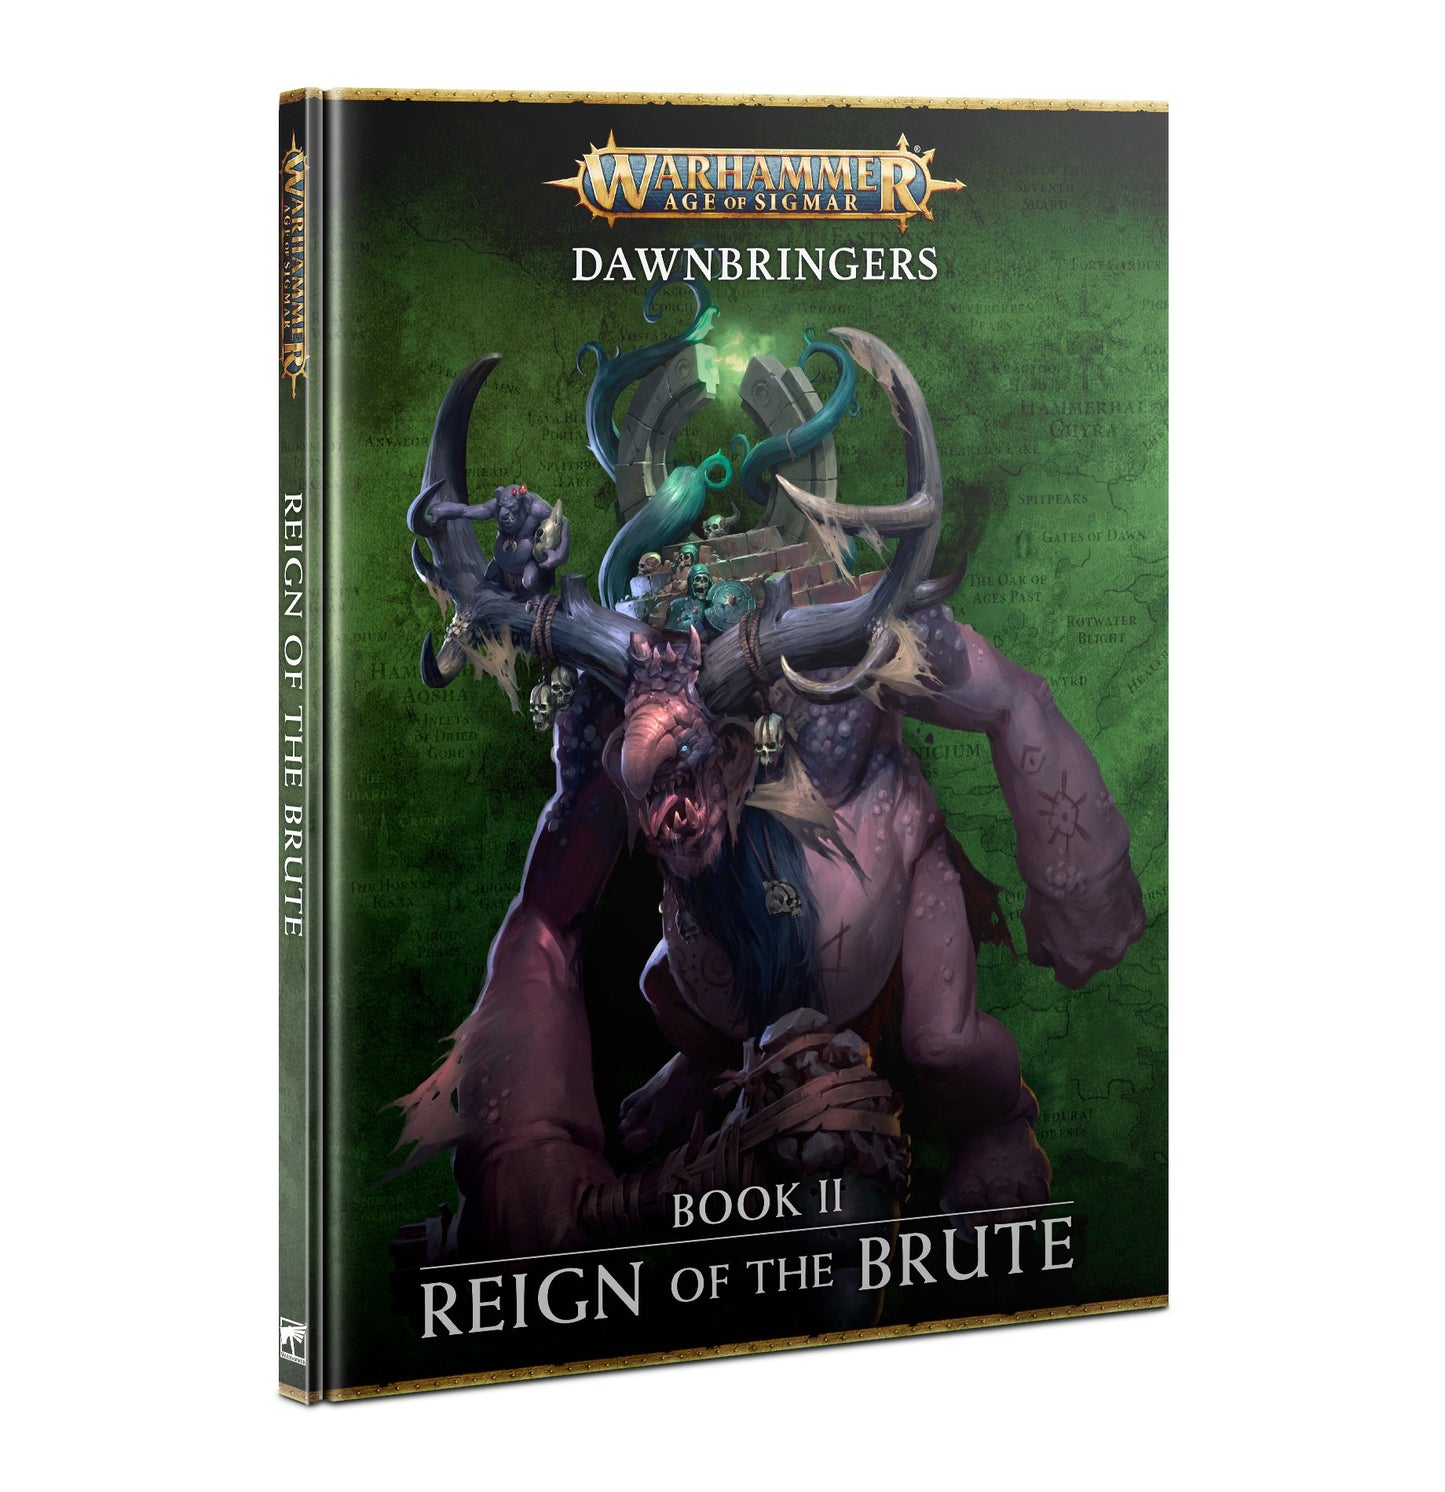 Age of Sigmar: Dawnbringers: Reign of the Brute